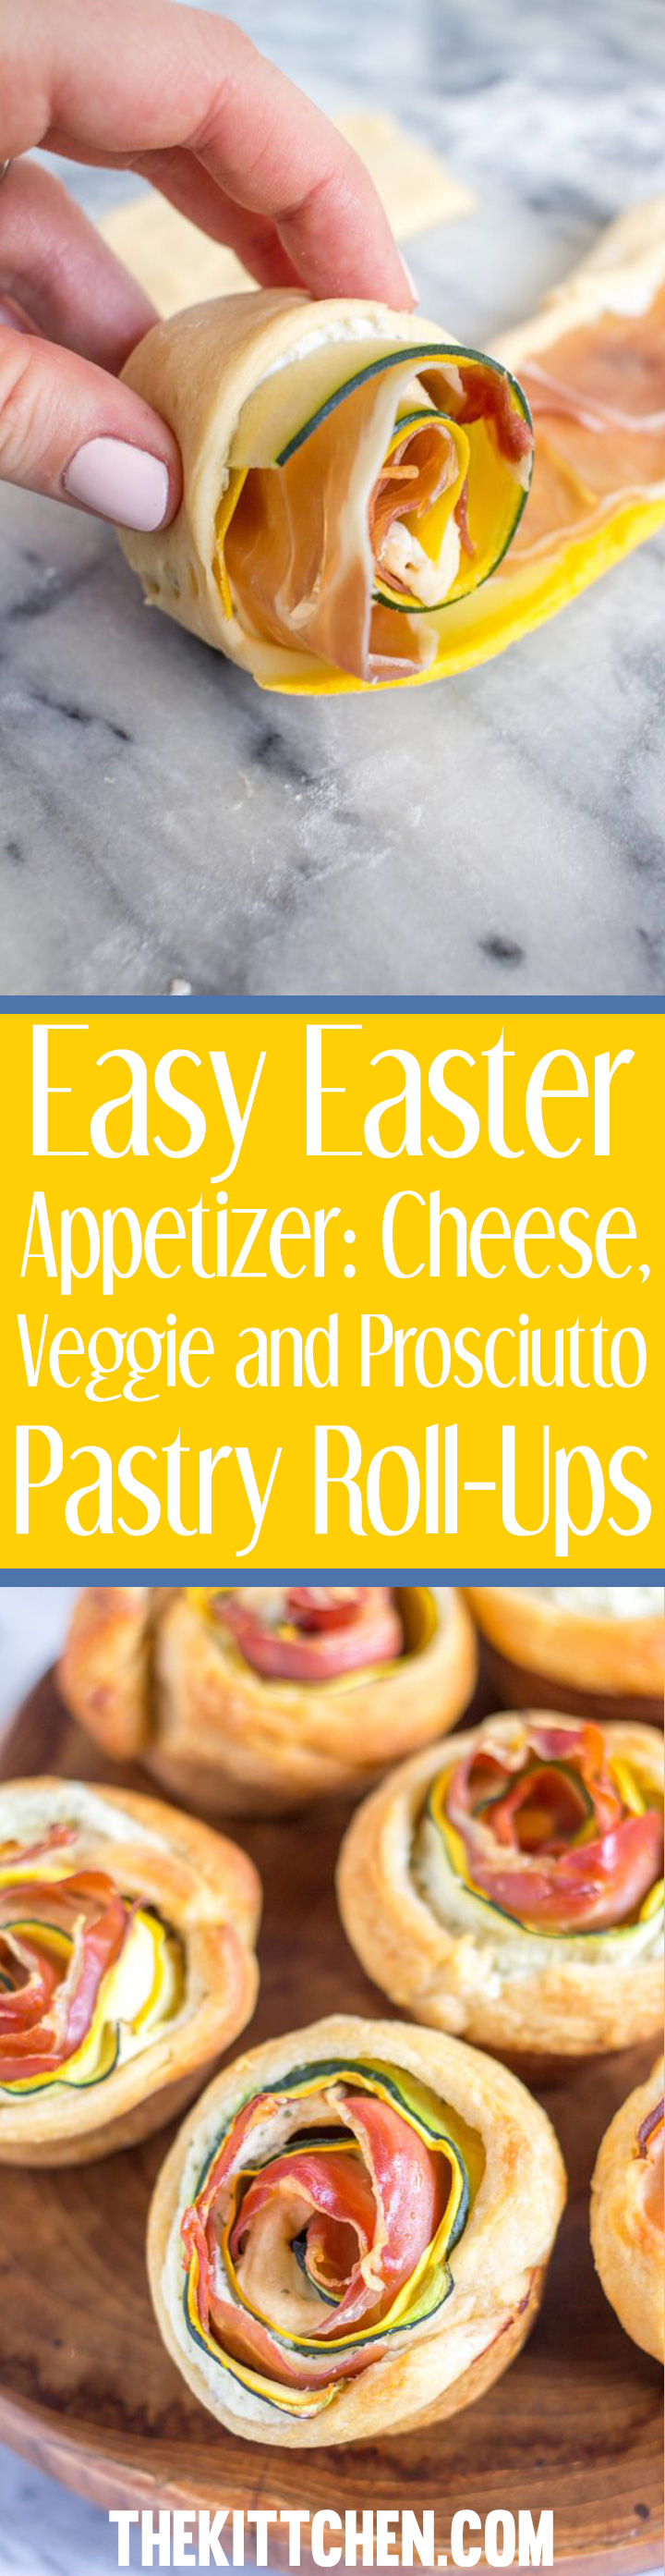 This Cheese, Veggie, and Prosciutto Pastry Roll Ups recipe is an easy Easter appetizer takes just minutes to prepare, and it is a beautiful addition to a brunch. Crescent roll dough is sliced into strips, layered with creamy cheese, shaved zucchini and yellow squash, and prosciutto before being rolled up and baked.